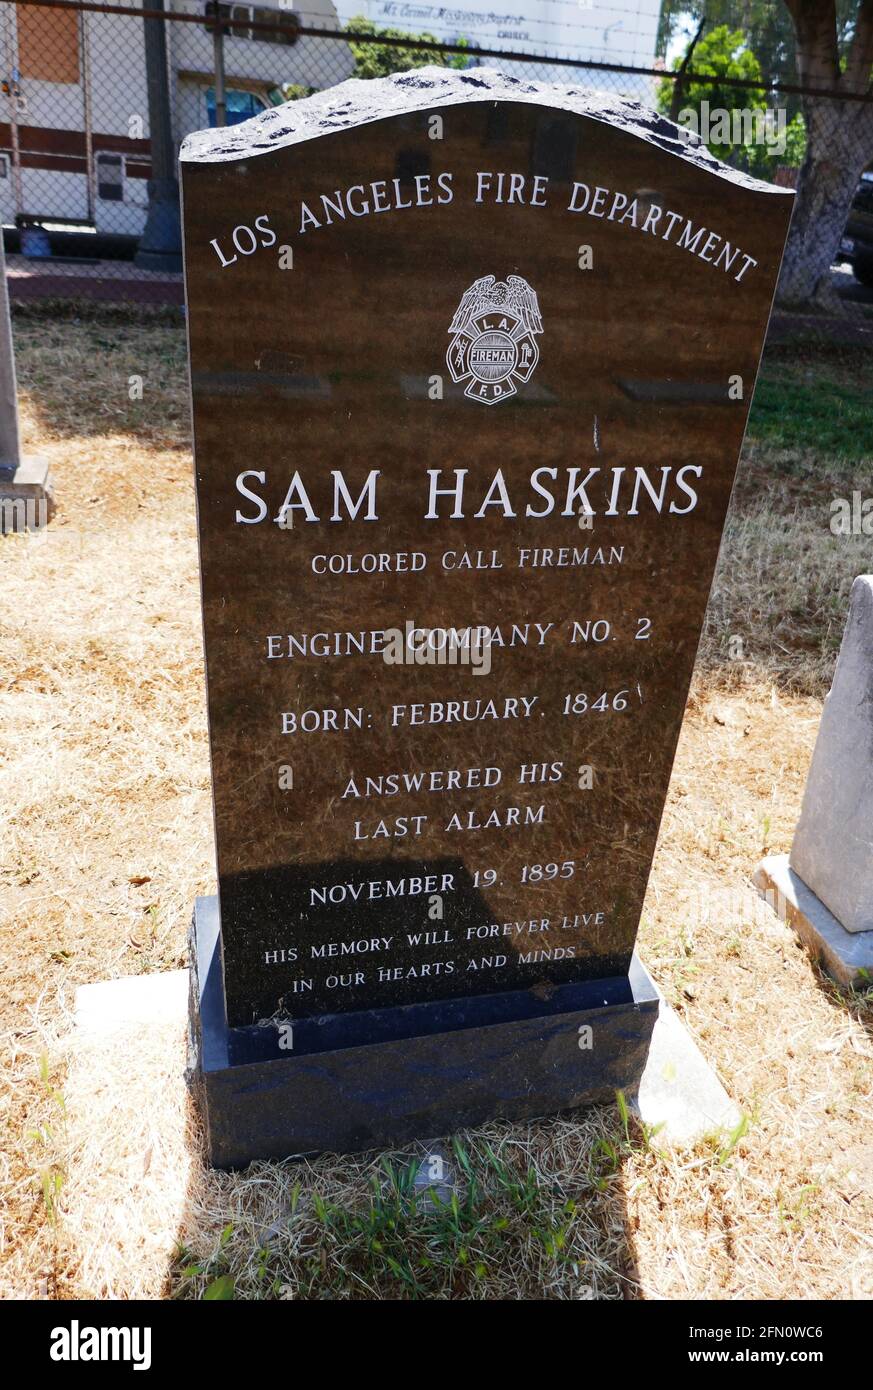 Los Angeles, California, USA 5th May 2021 A general view of atmosphere of Firefighter Sam Haskins Grave at Evergreen Cemetery at 204 Evergreen Avenue on May 5, 2021 in Los Angeles, California, USA. Photo by Barry King/Alamy Stock Photo Stock Photo